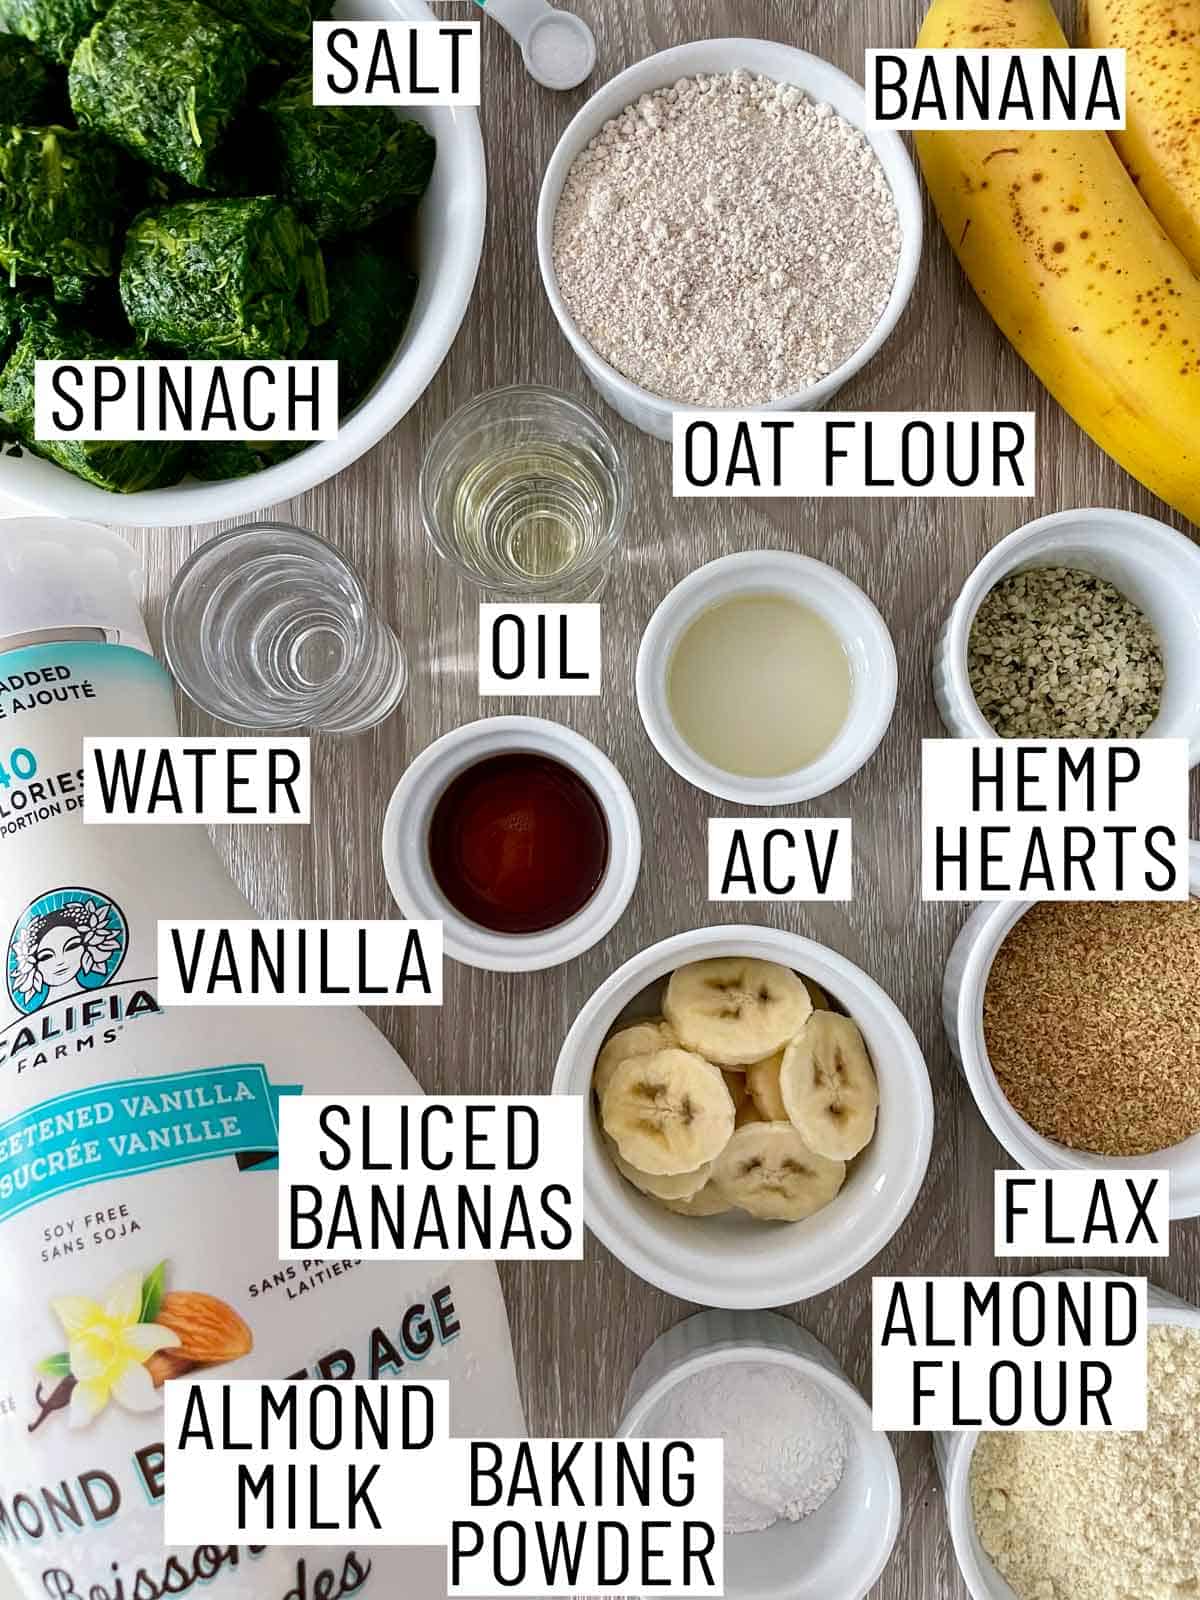 Ingredients needed to make spinach muffins.